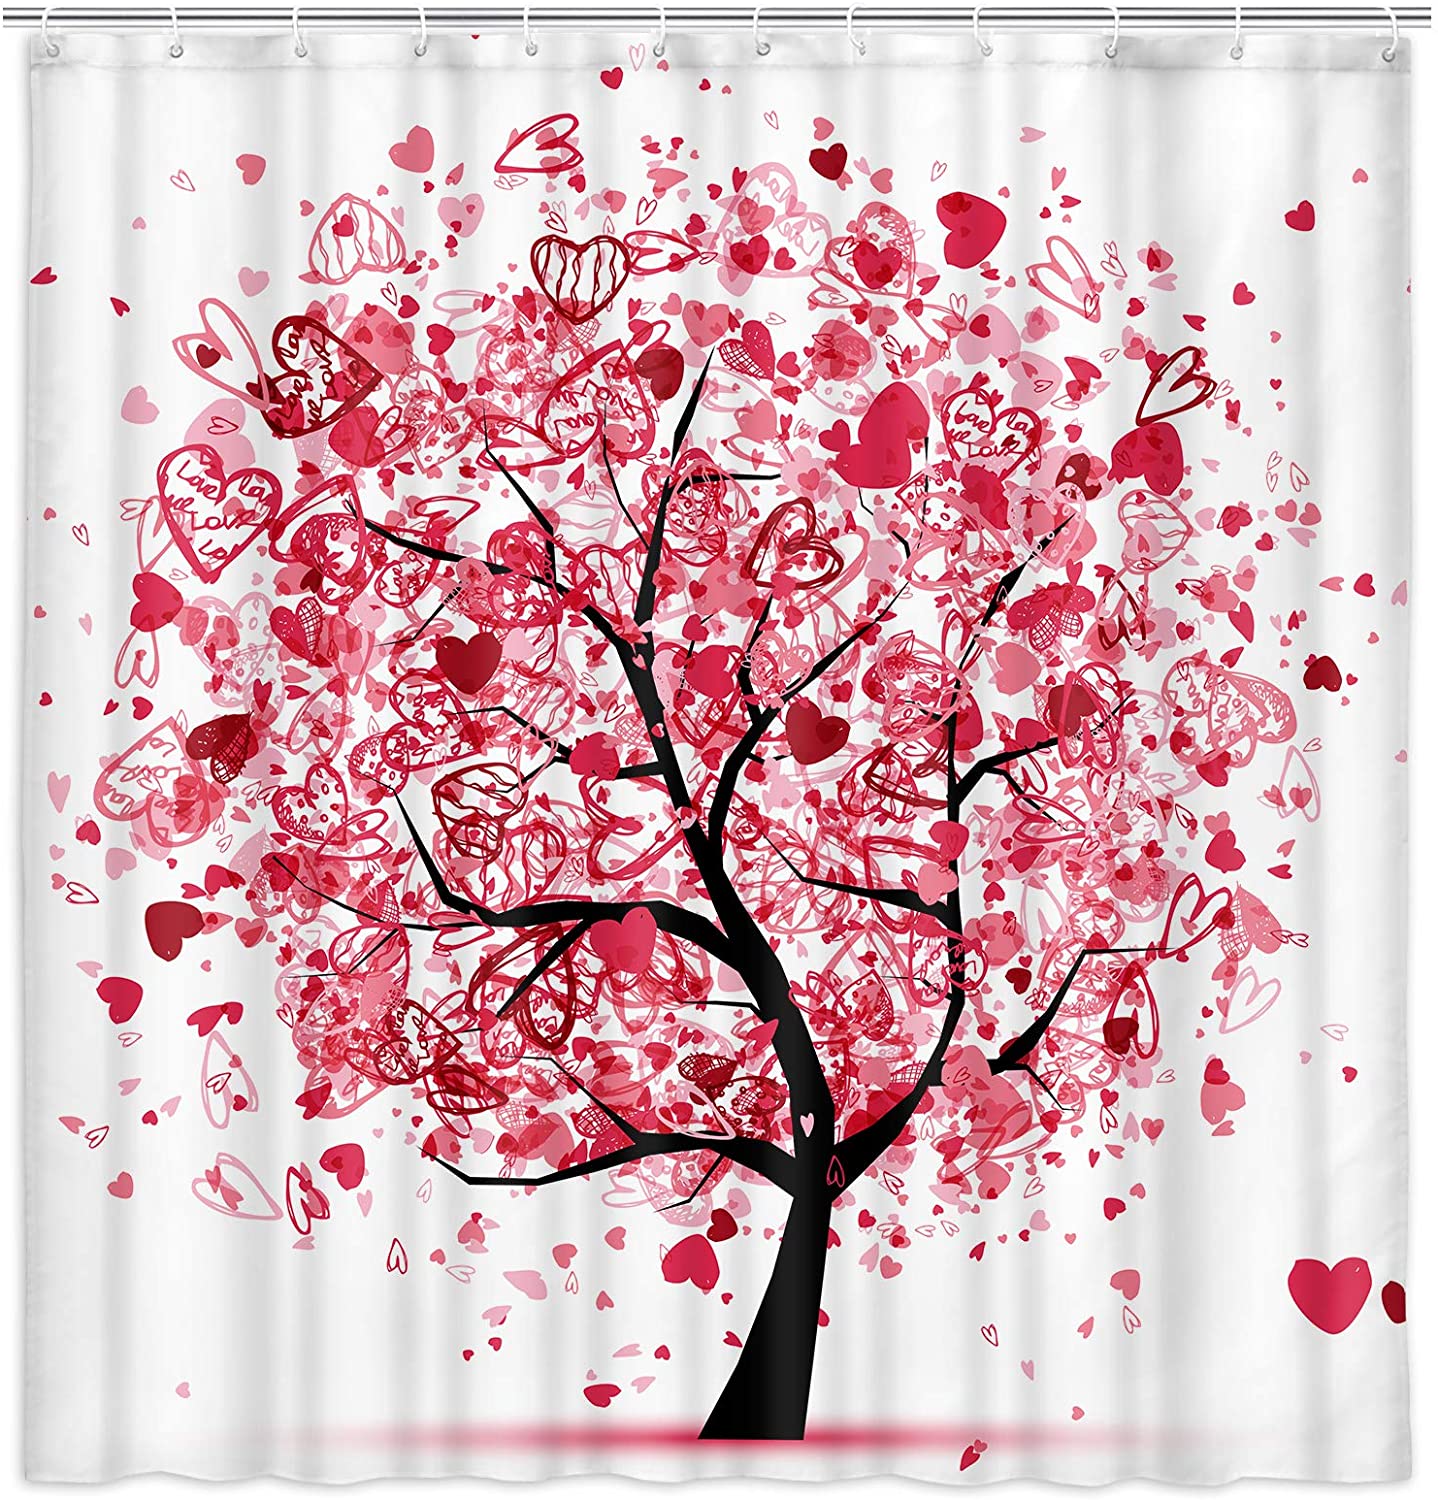 Factory directly supply Capiz Shell Wind Chime - Tree of Life Shower Curtain for Bathroom Valentines Tree with Pink Hearts Doodles Decorated Shower Curtain Fabric Bathroom Curtain – DAIRUI